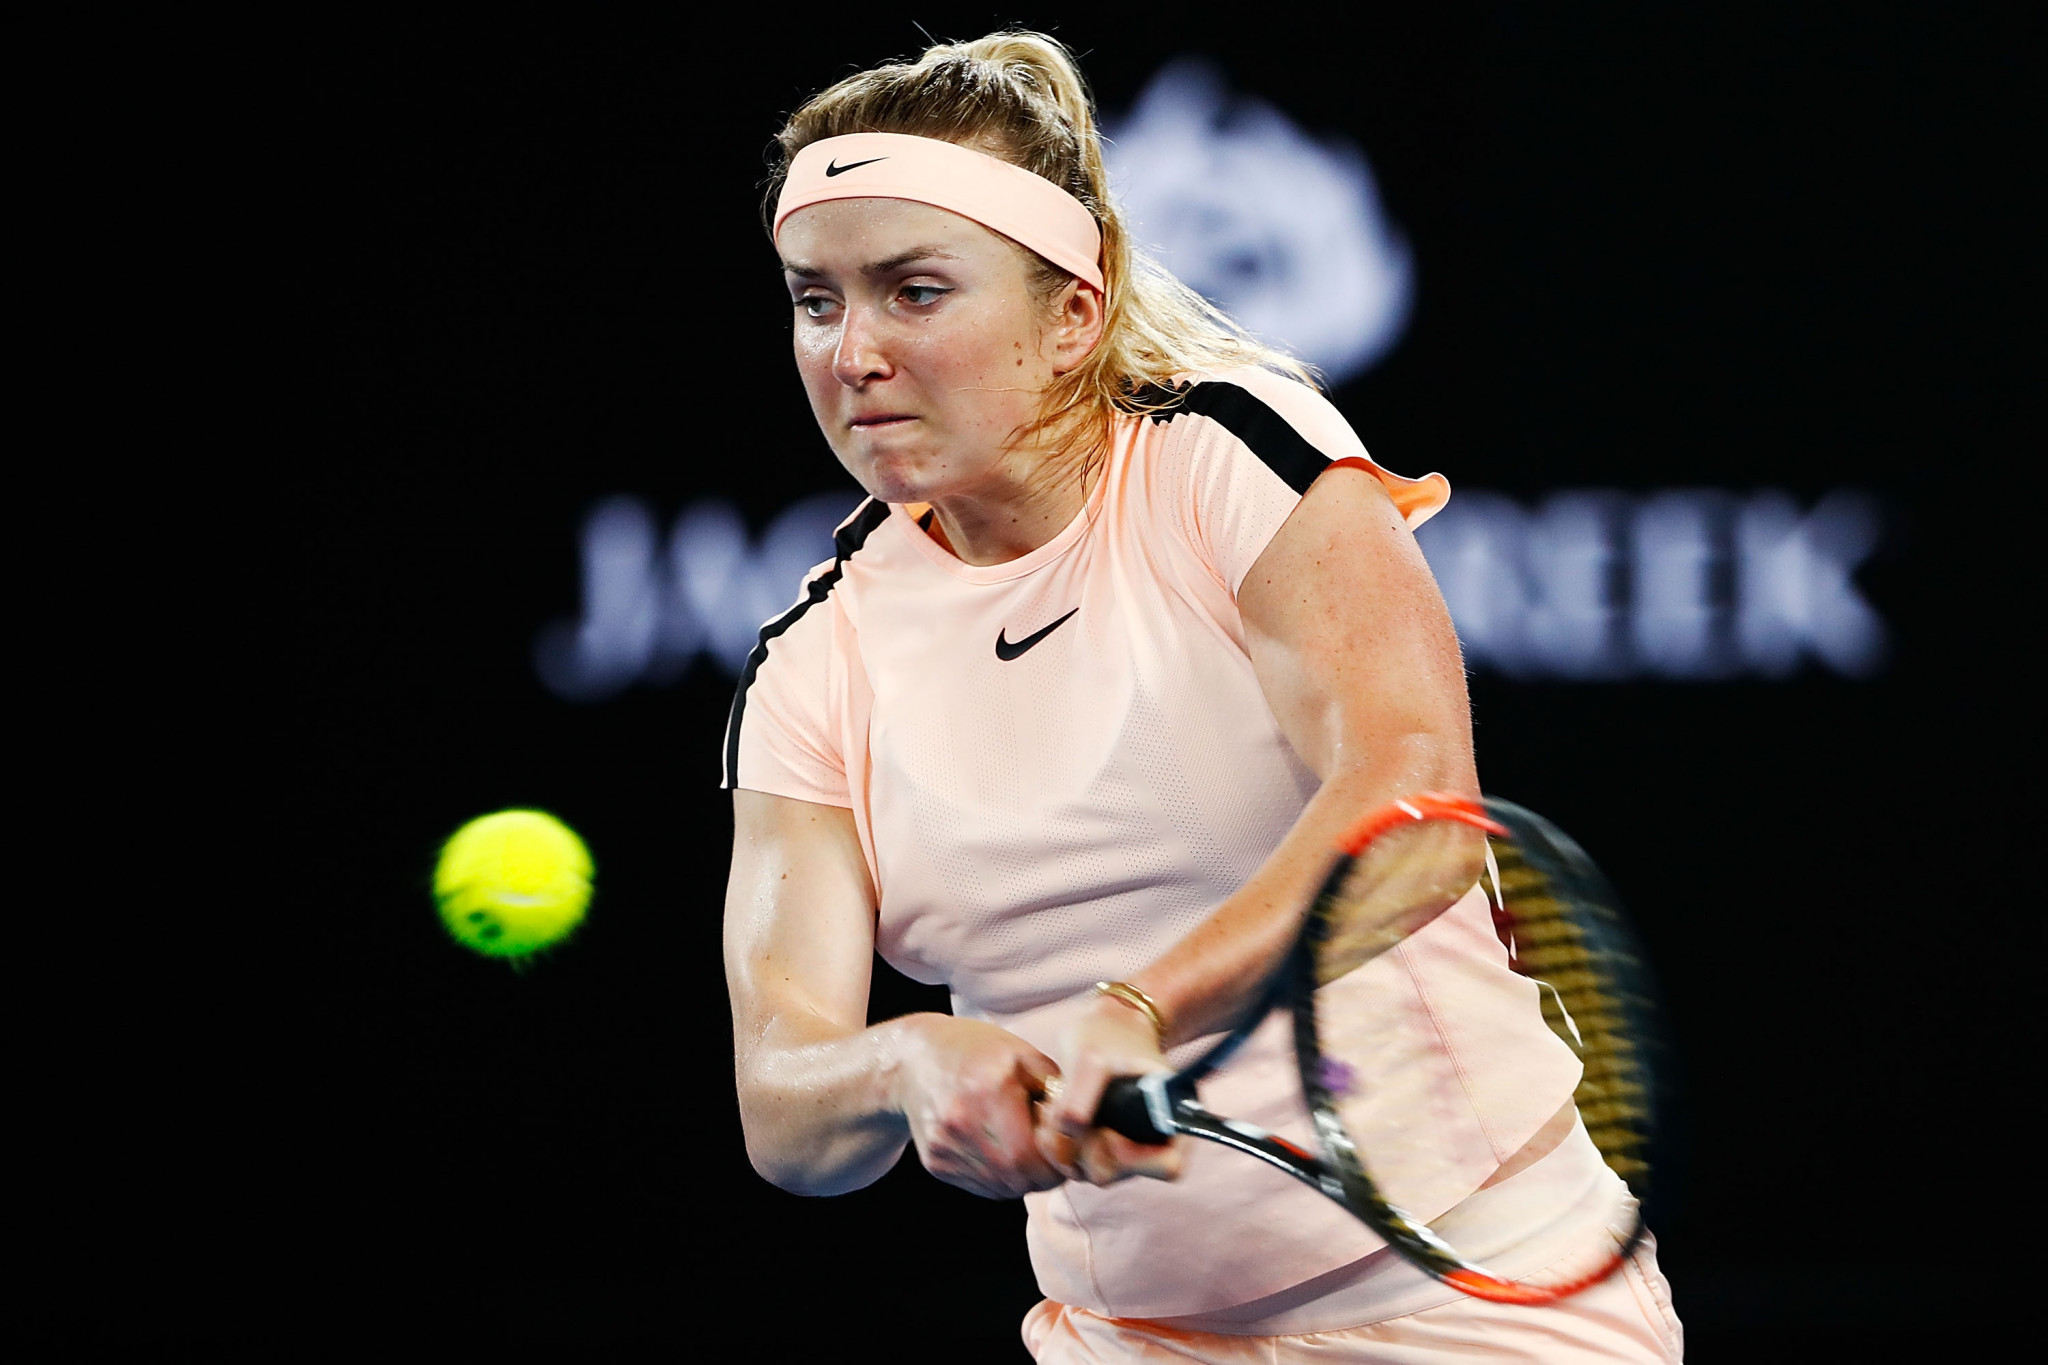 Elina Svitolina won the final match, well after midnight in Melbourne ©Getty Images